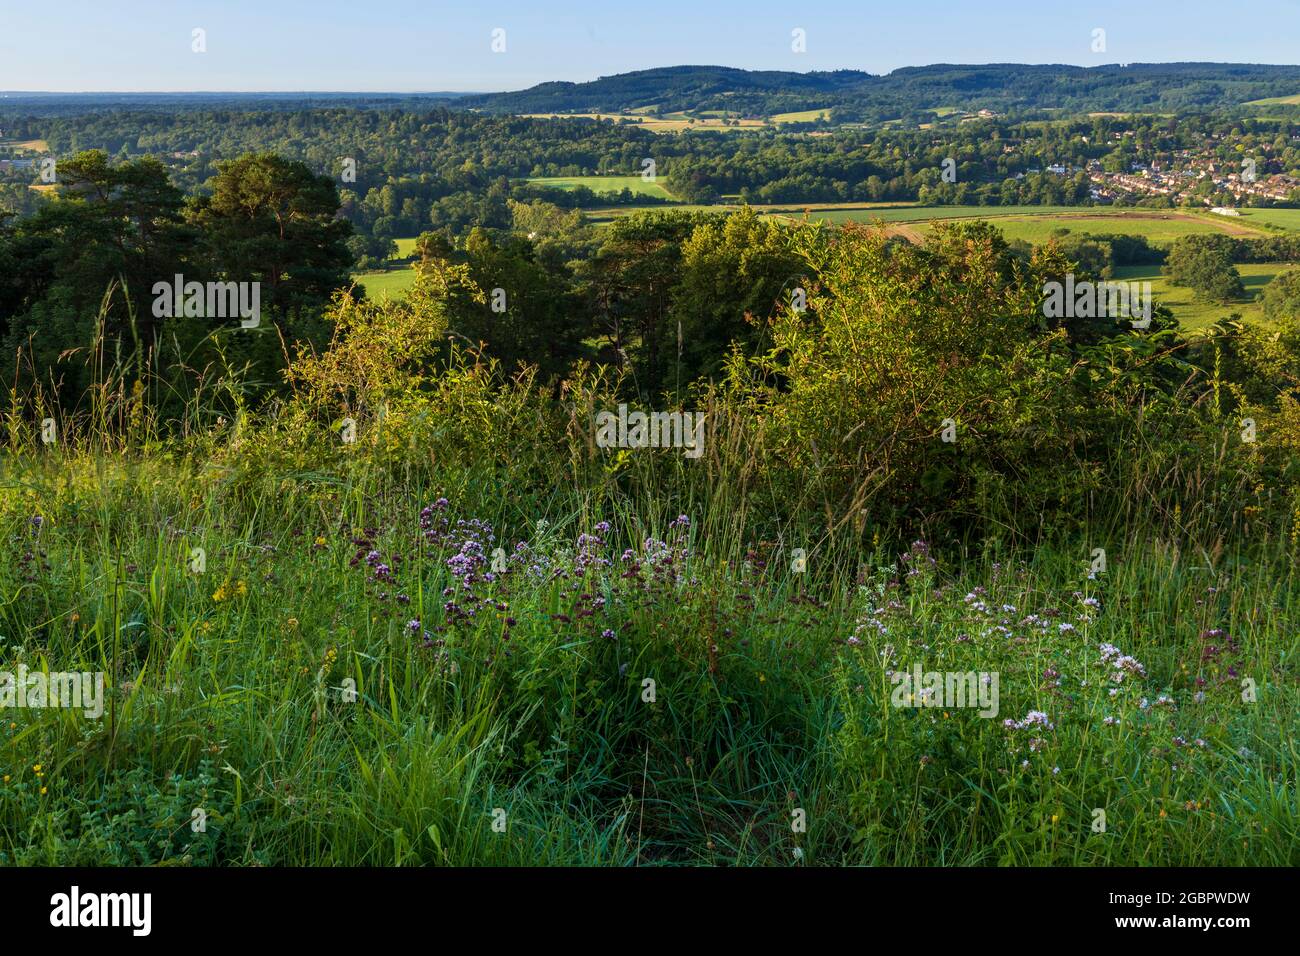 View across the Surrey hills and countryside from Ranmore Common Denbies Hillside with wild Marjoram in the foreground Stock Photo